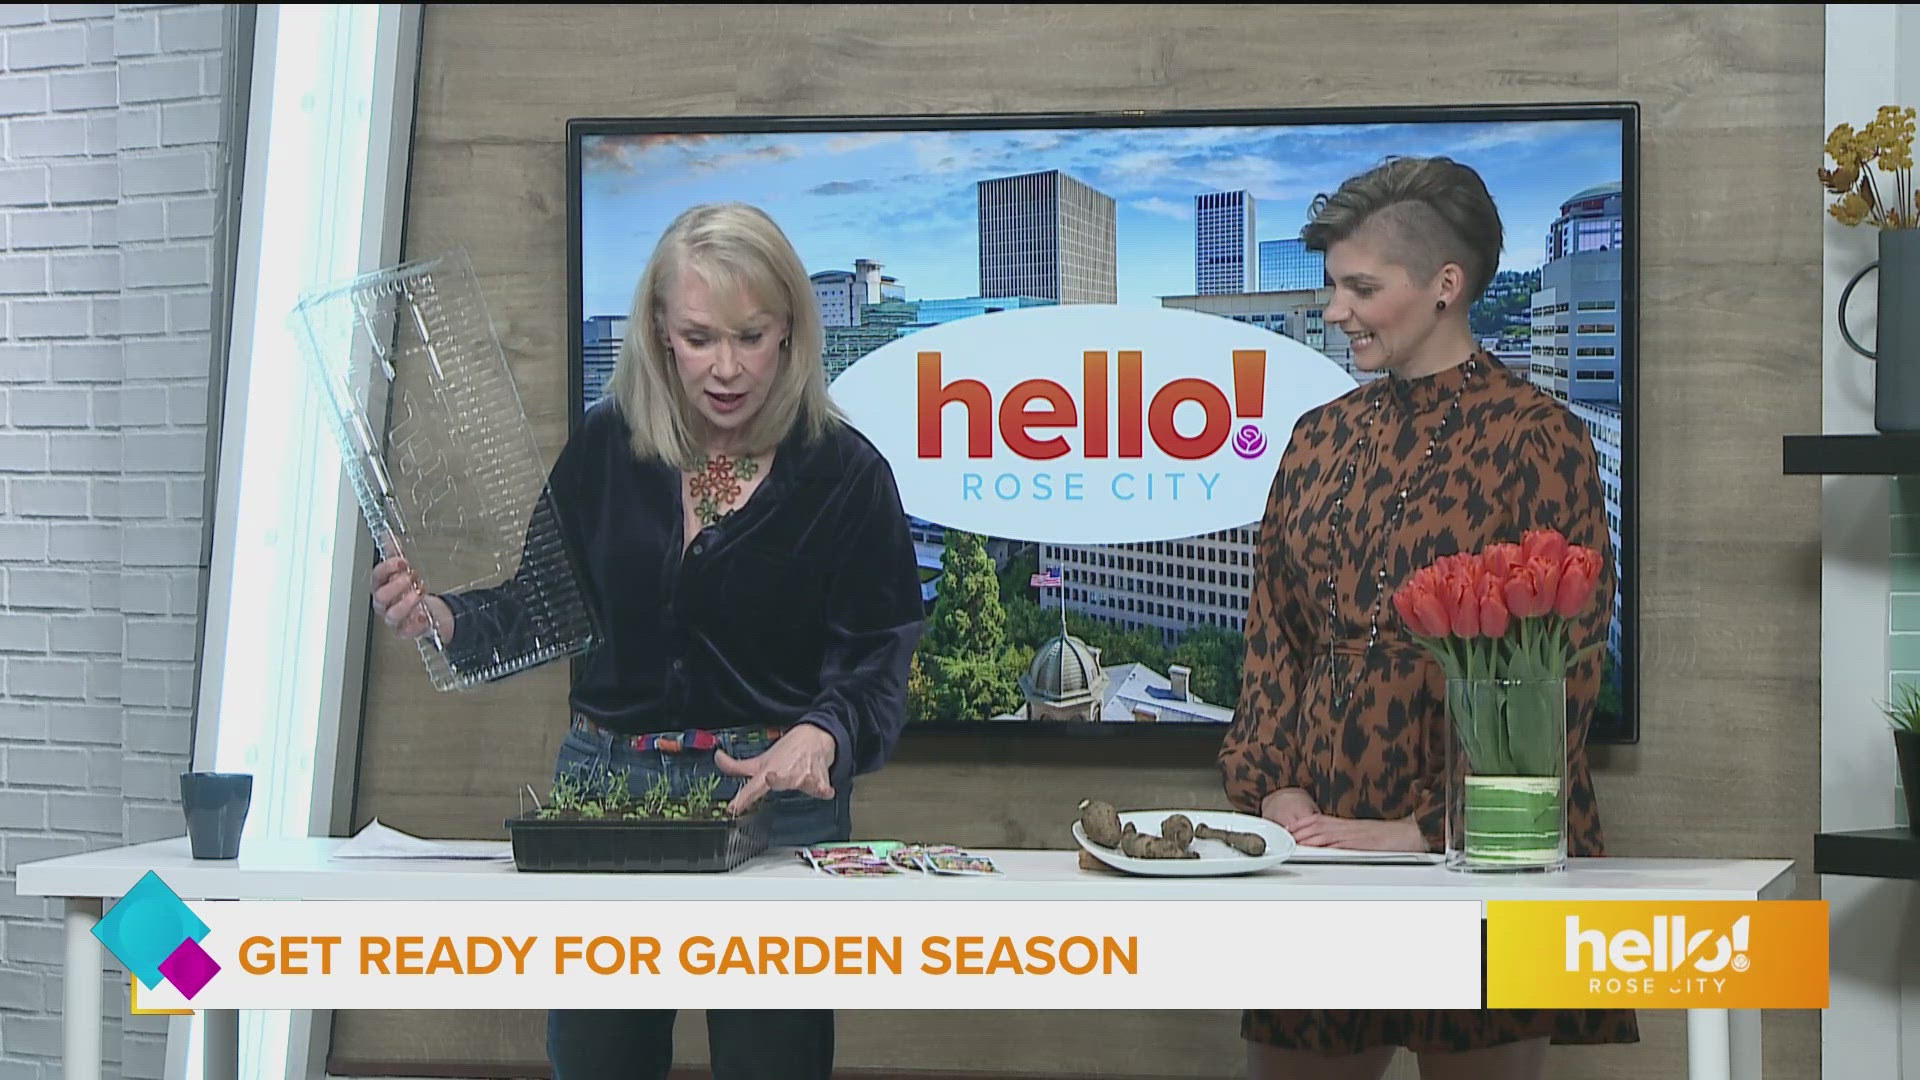 Anne talks about seeds and starts, and how to plant dahlias